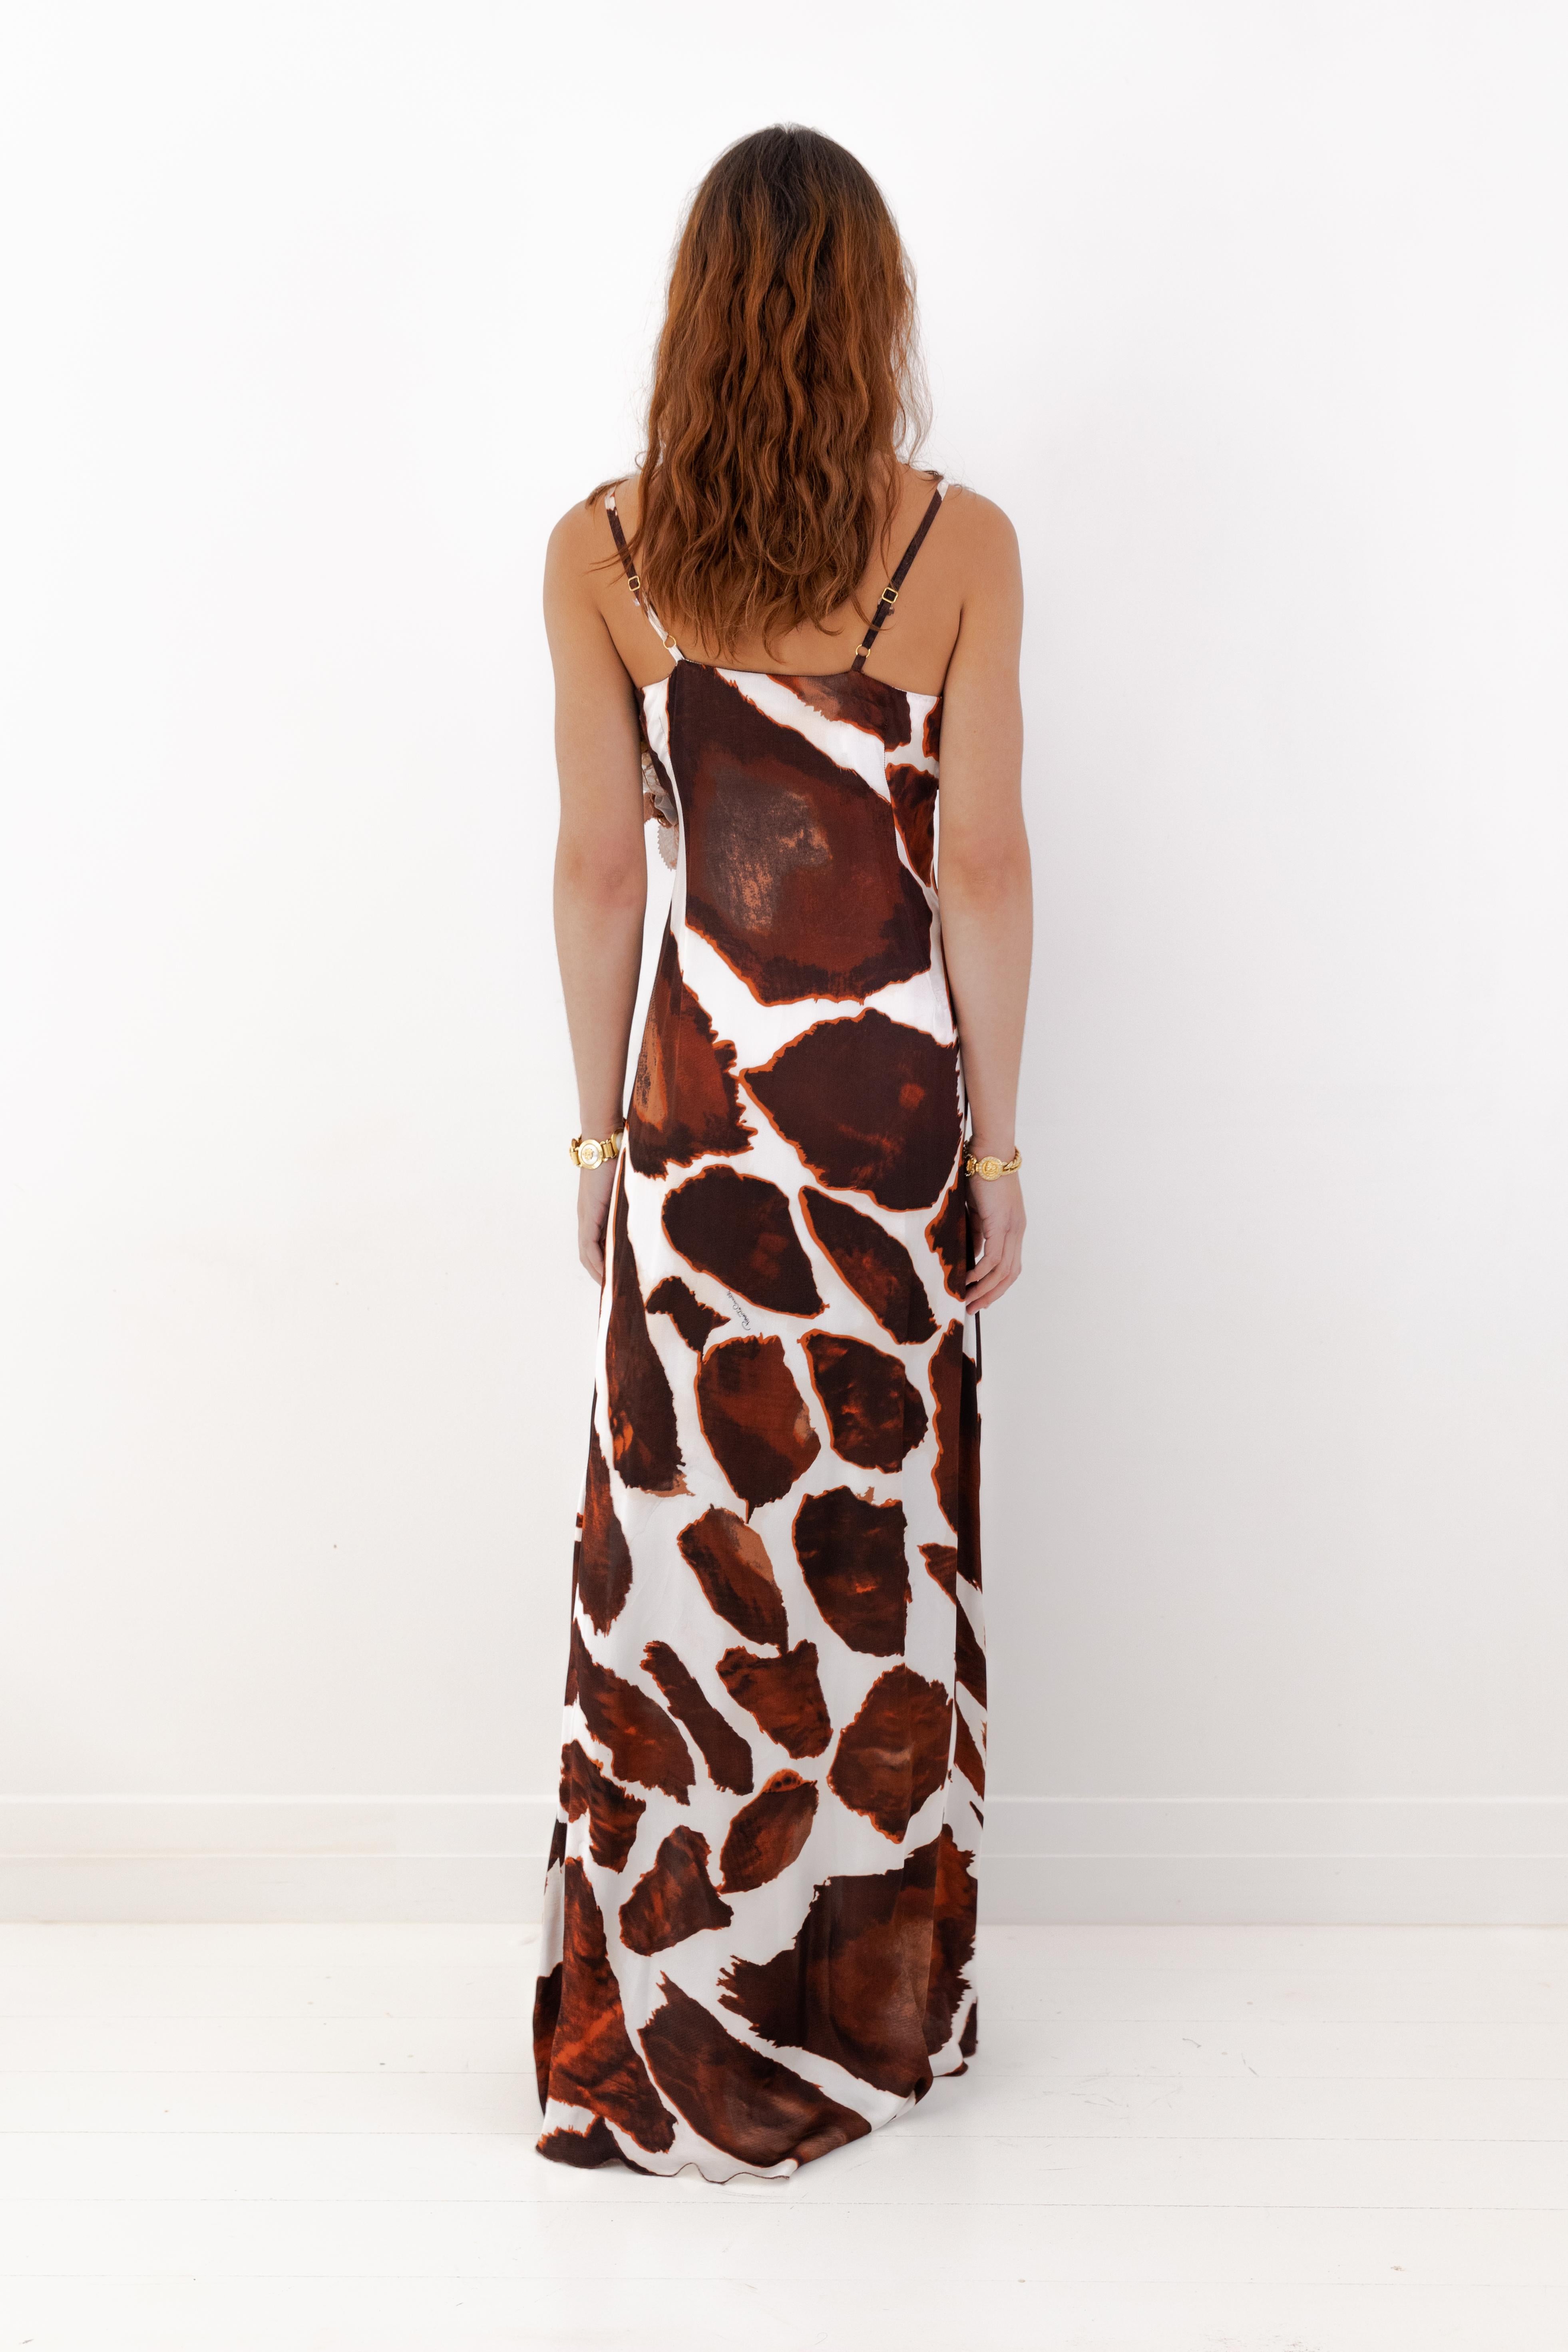 Roberto Cavalli S/S 2006 Giraffe Print Silk Gown with 3D Floral Appliqués For Sale 5